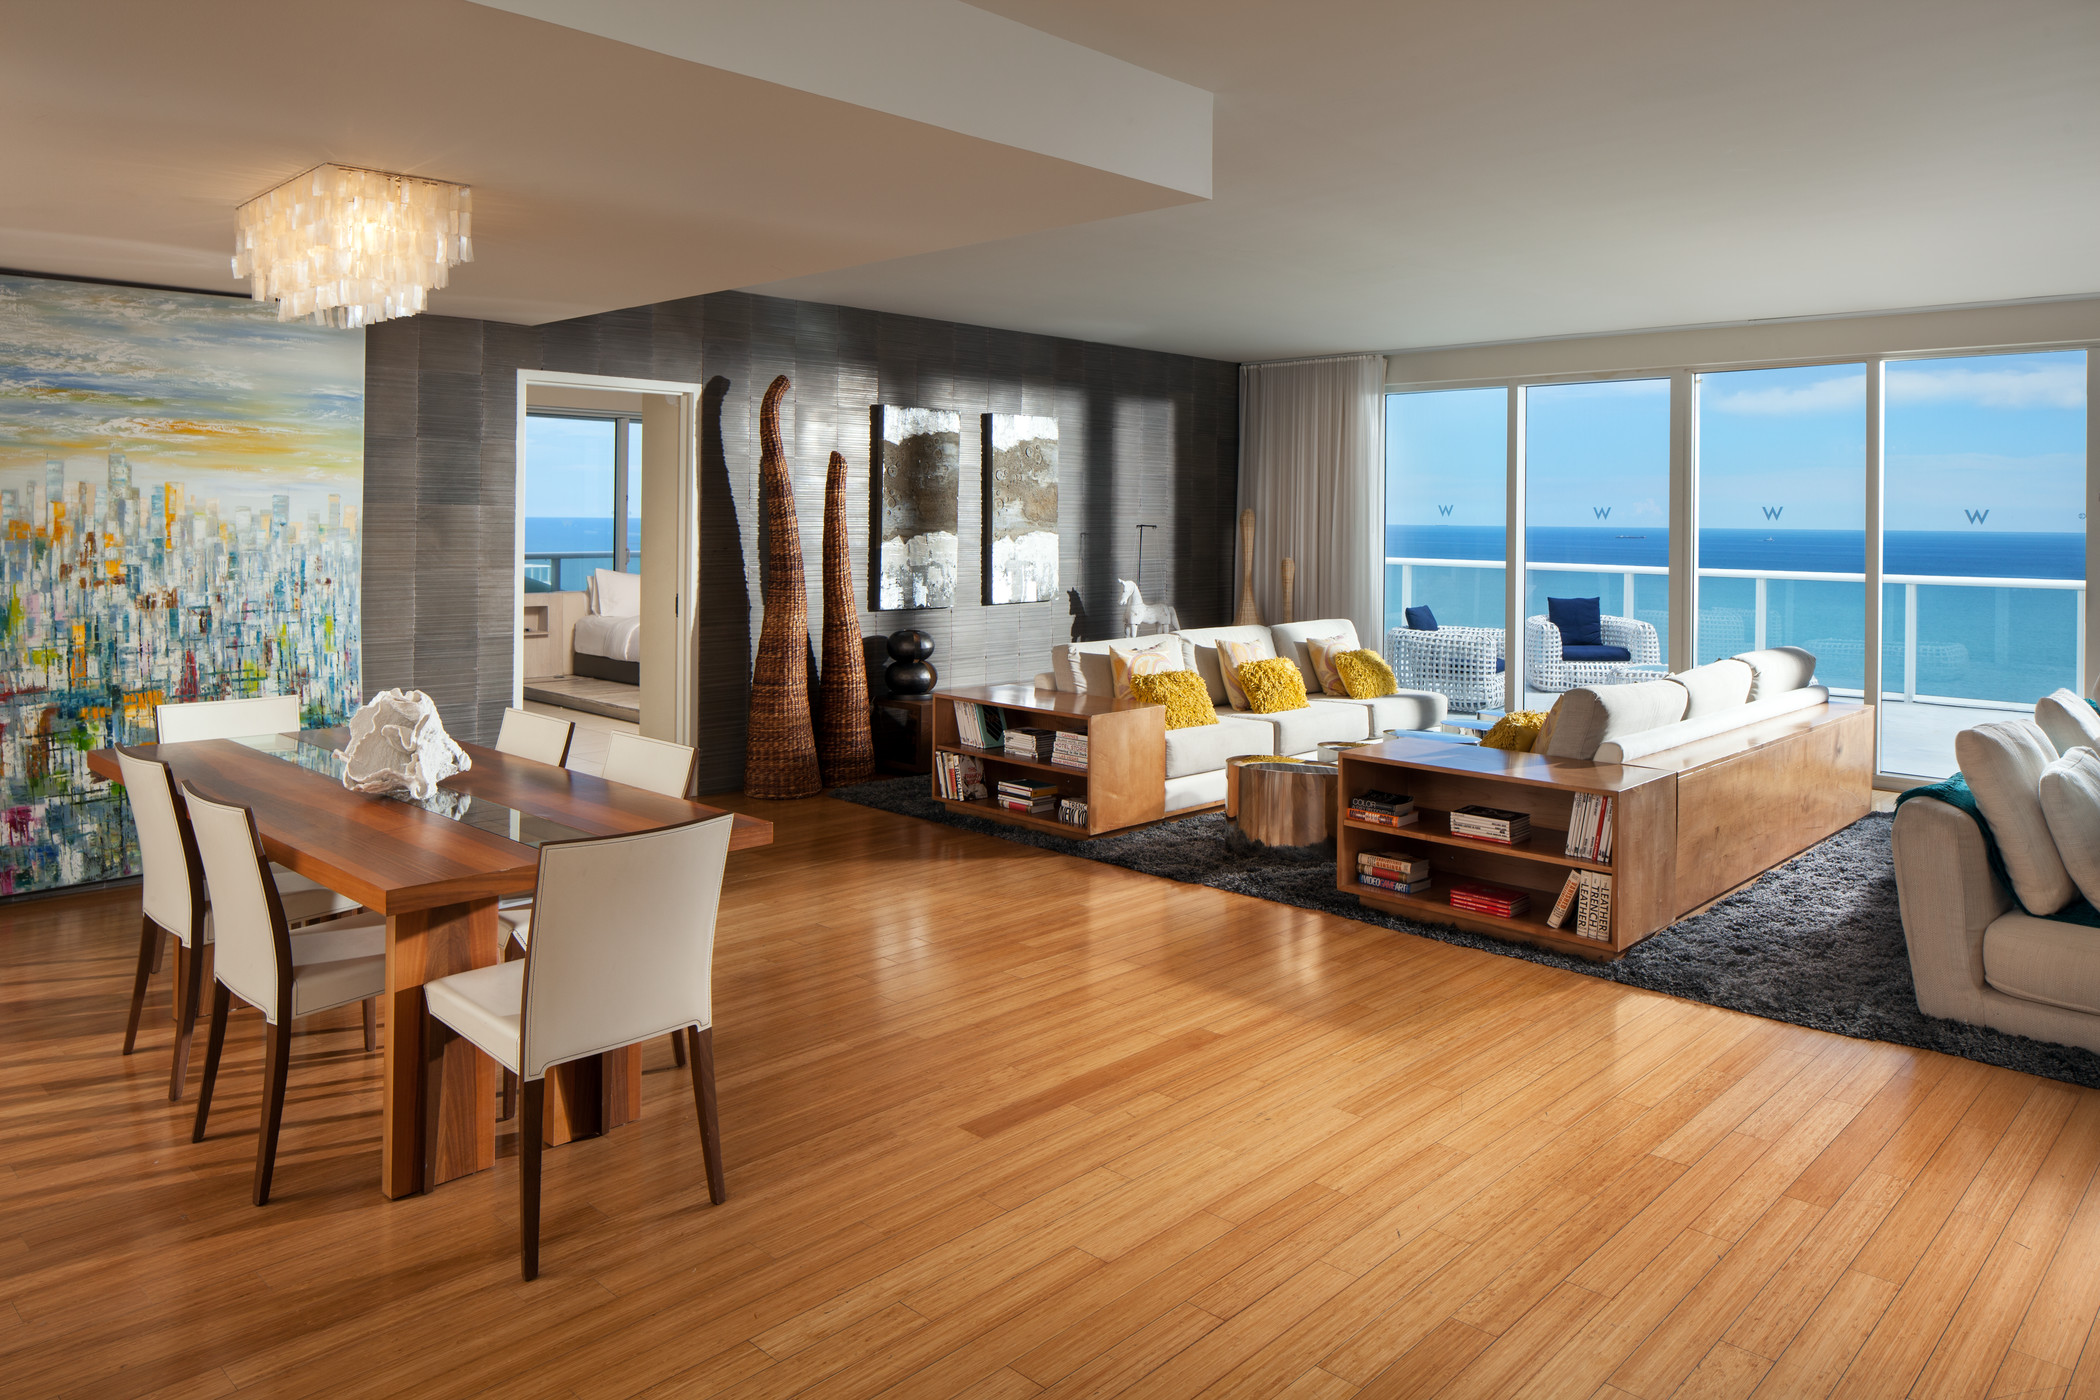 Living room and dining area with large mural and balconyl with ocean view